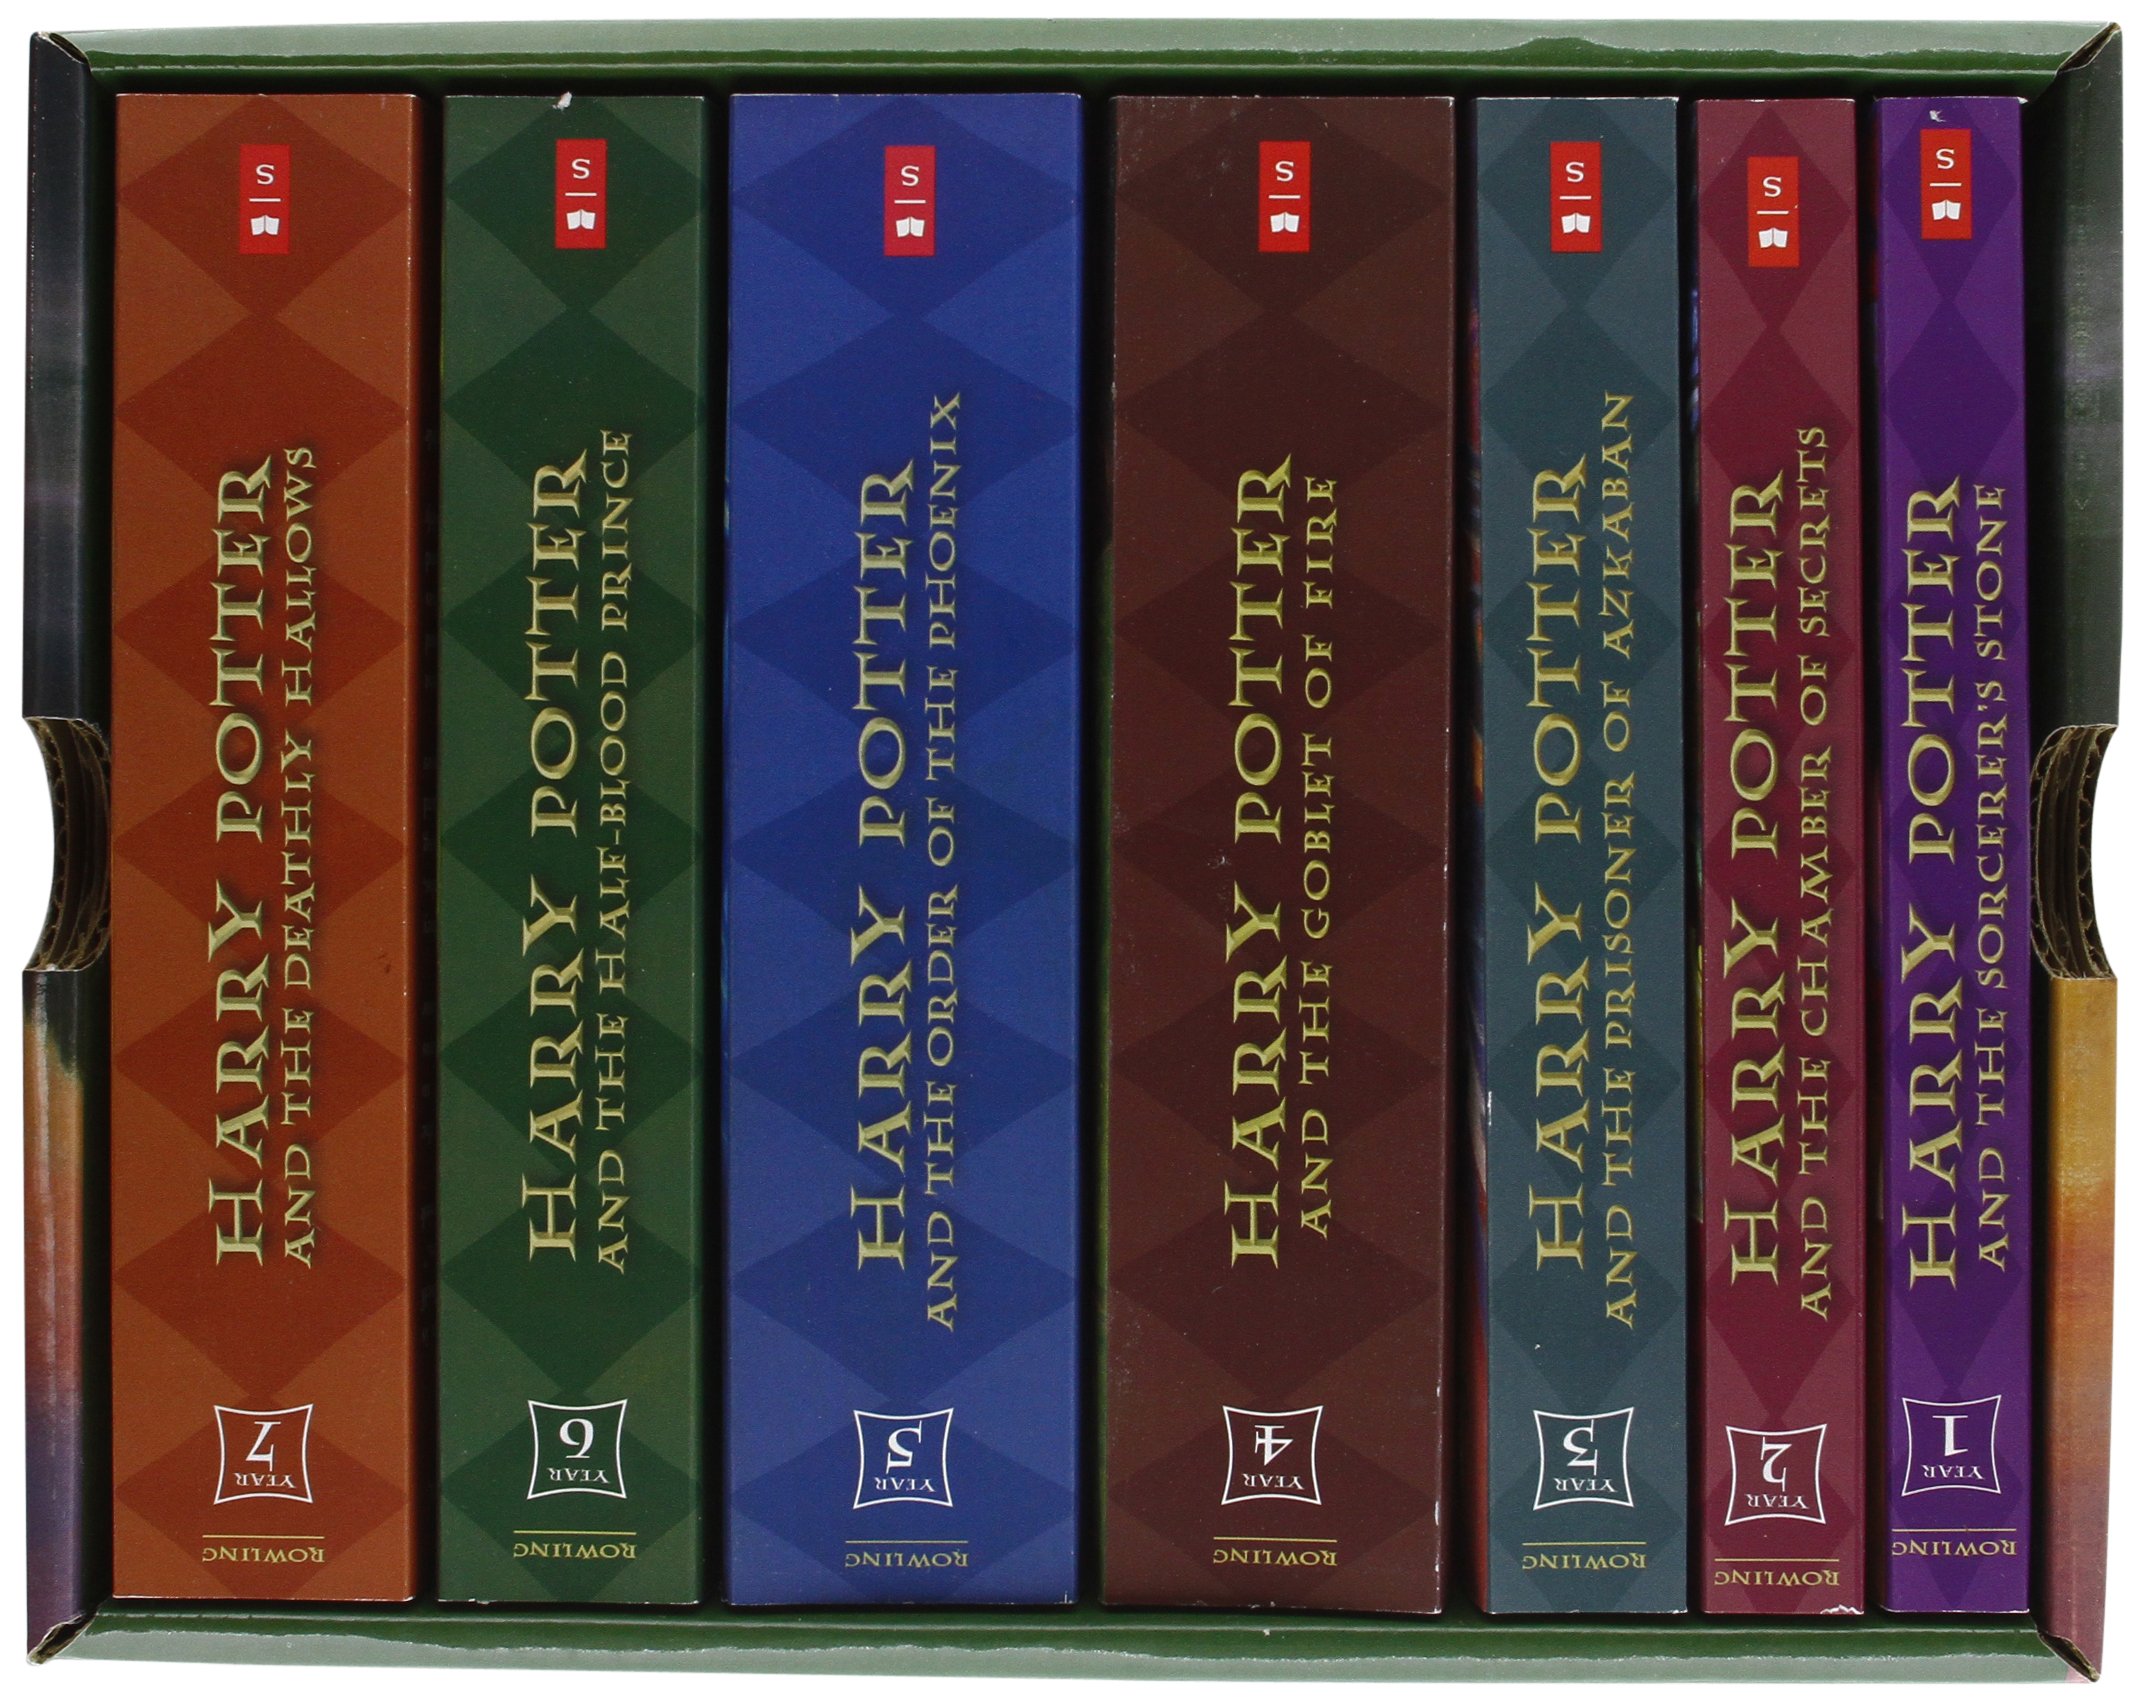 the last book of harry potter series